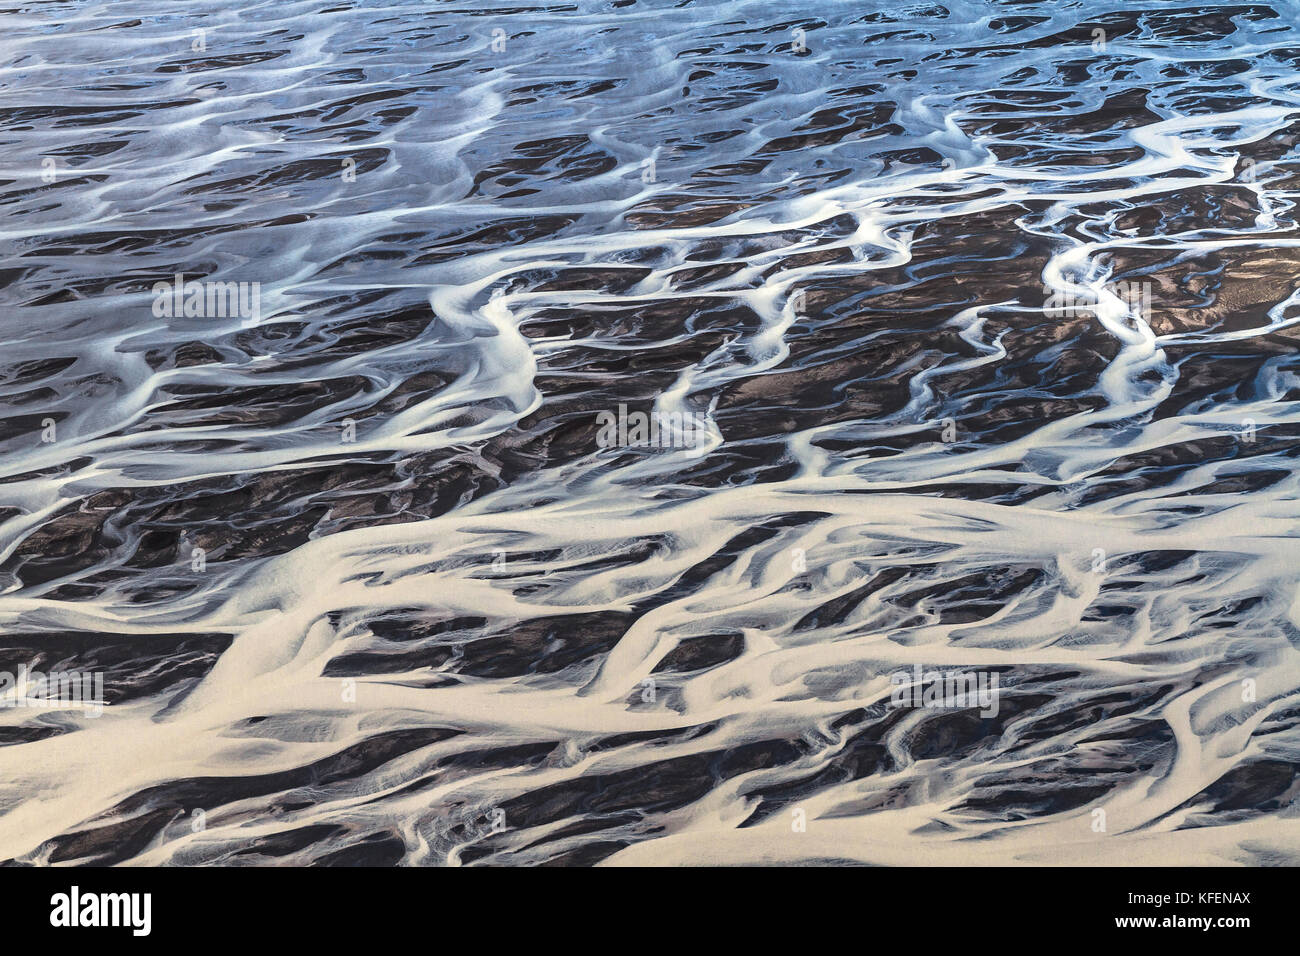 River Shapes in the Black Sand Stock Photo